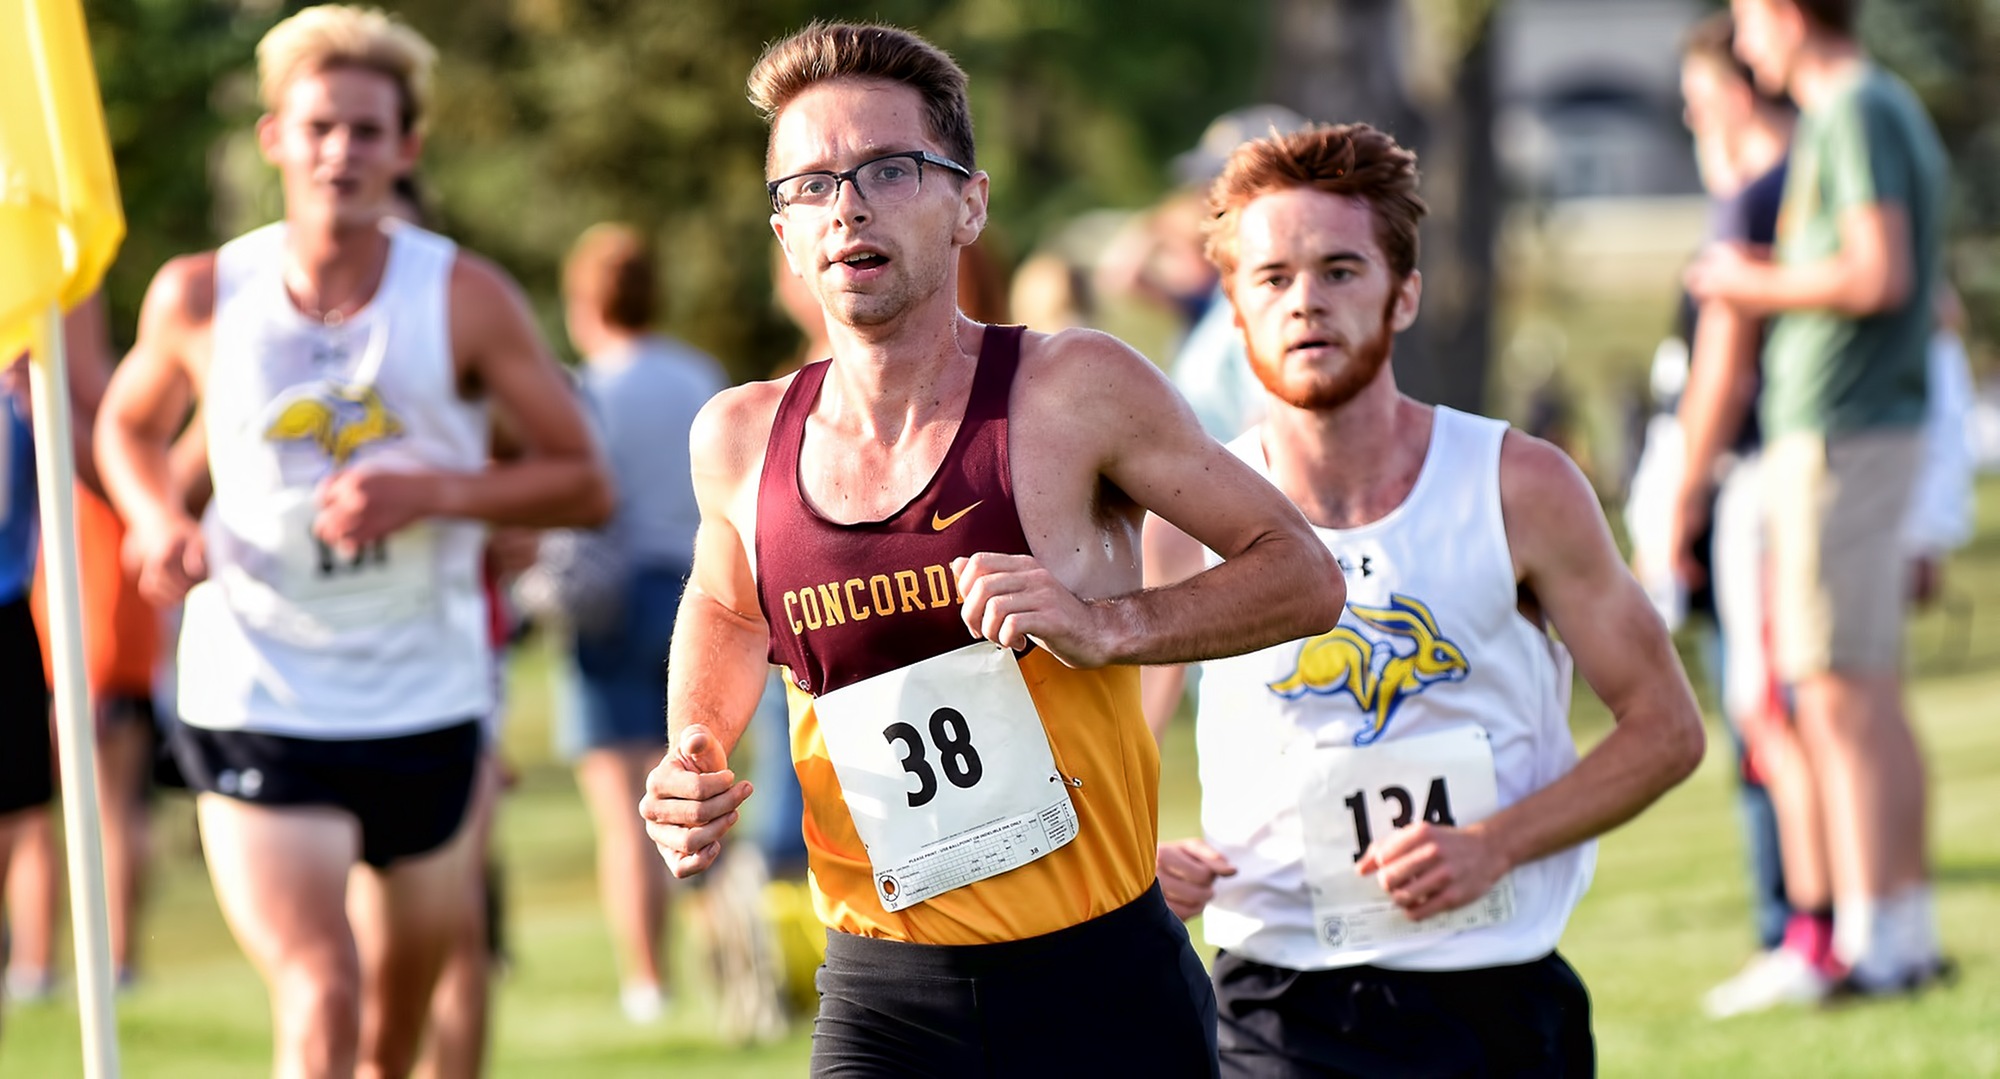 Senior Eric Wicklund rounds the corner in front of a pair of runners from DI SDSU at the season-opening Bison Open.